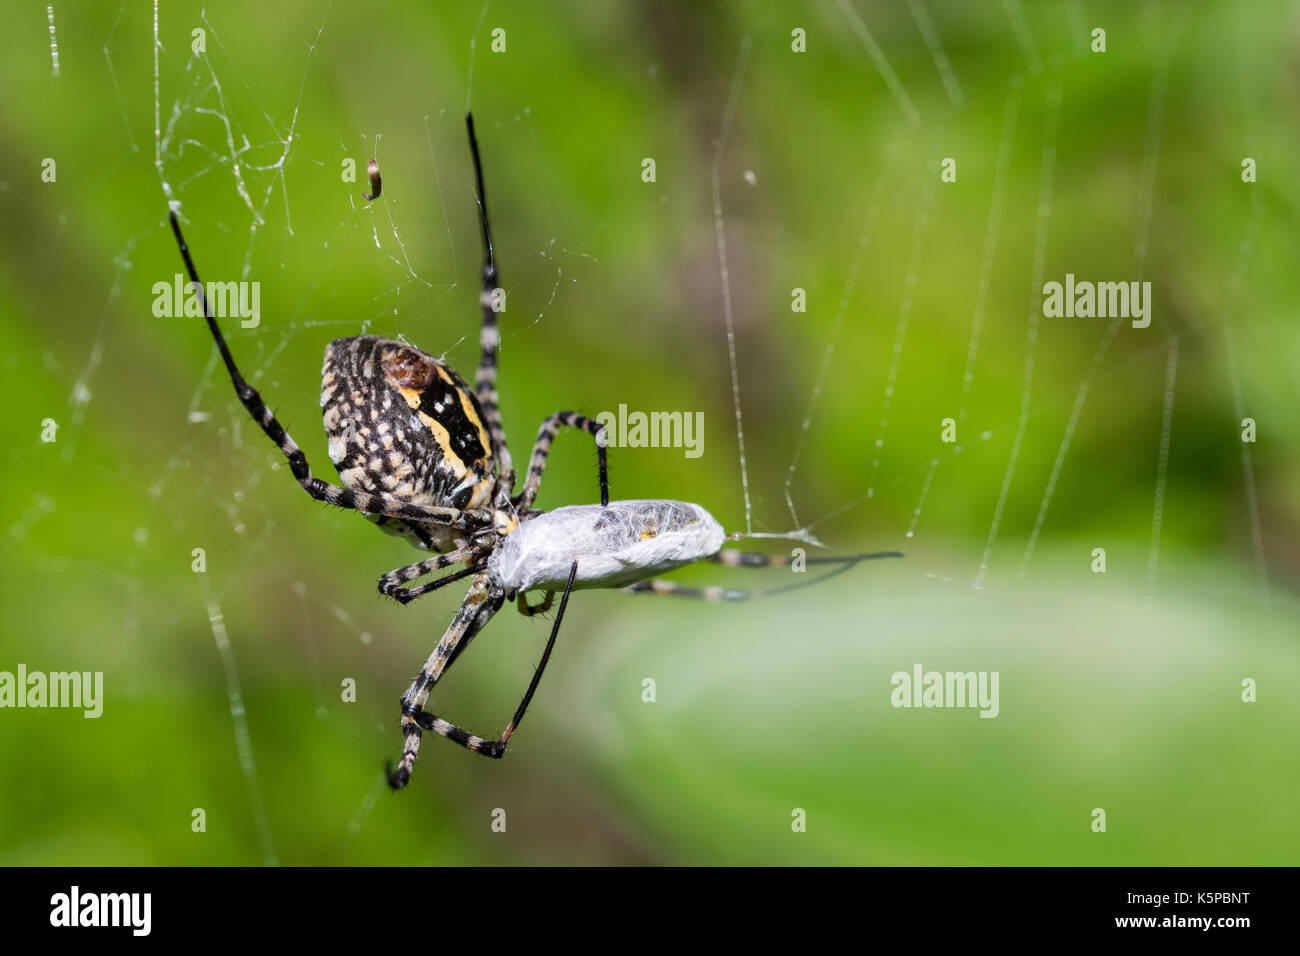 A Banded Argiope Spider (Argiope trifasciata) on its web about to eat its meal, probably a fly, in a dry valley in Malta. Stock Photo